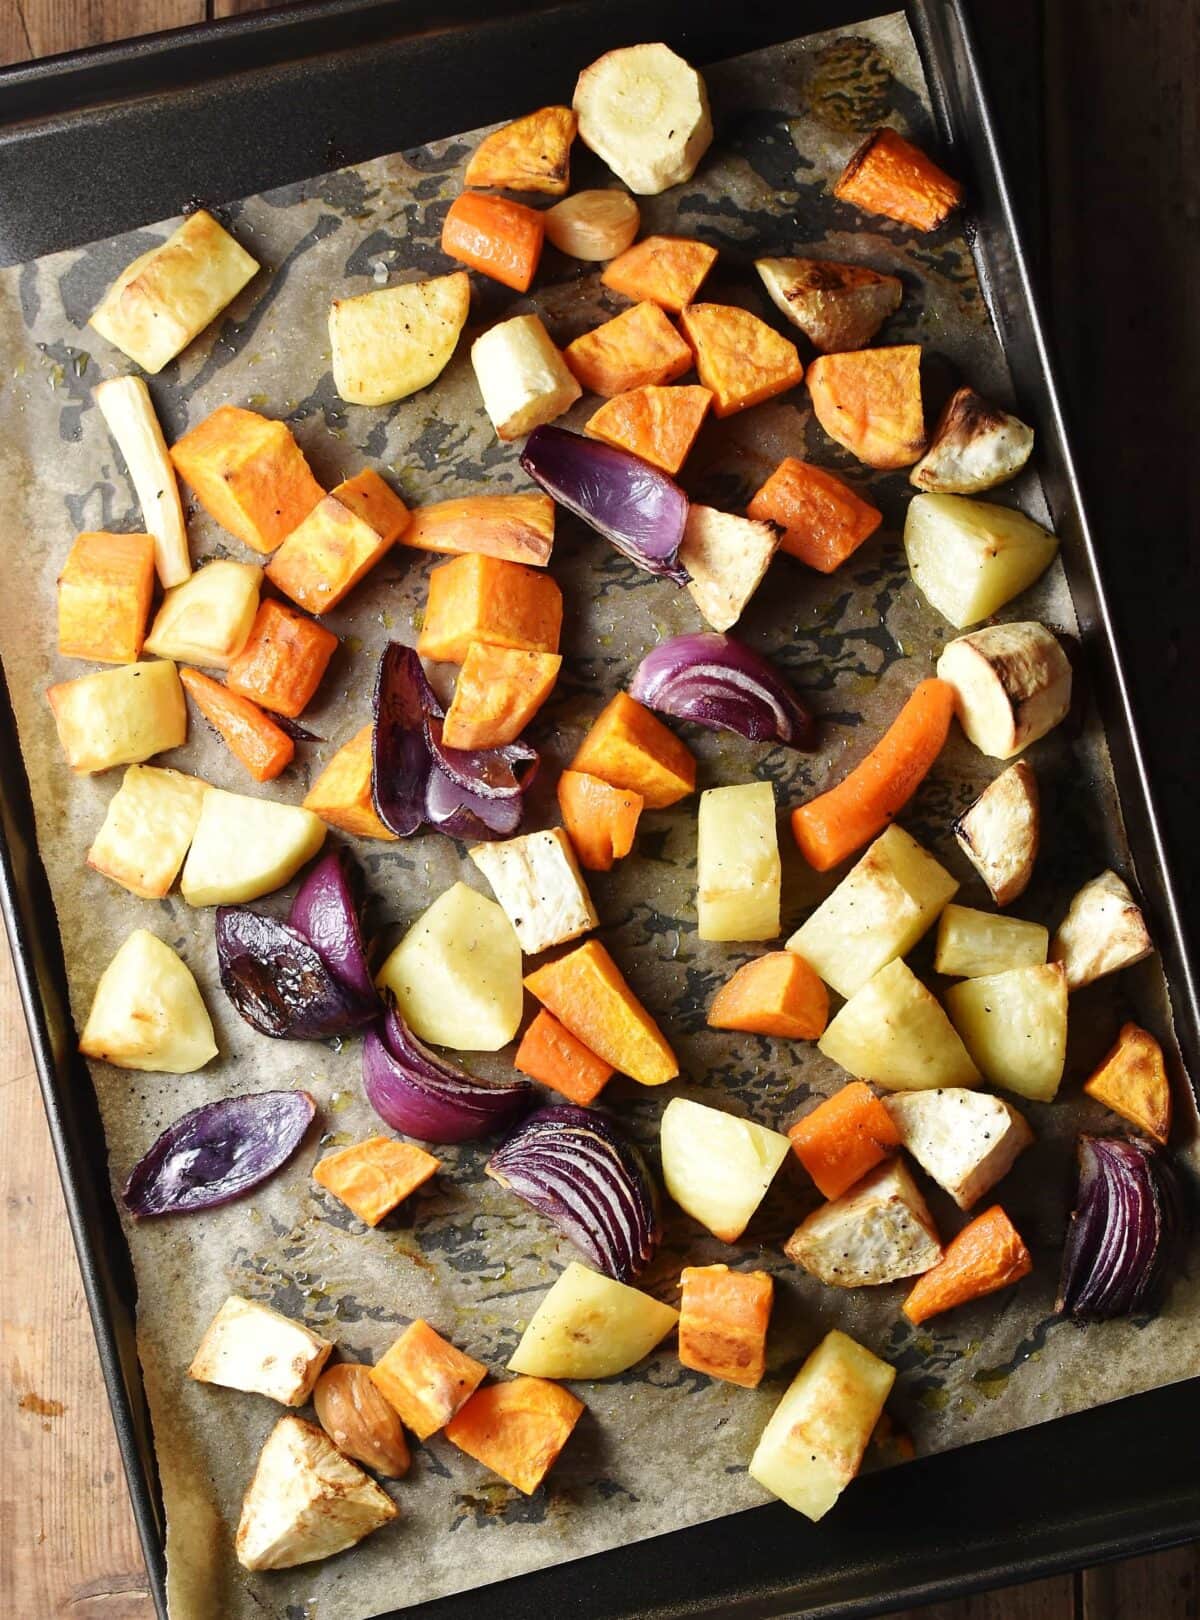 Roasted chunks of root vegetables and red onion on baking sheet lined with paper.